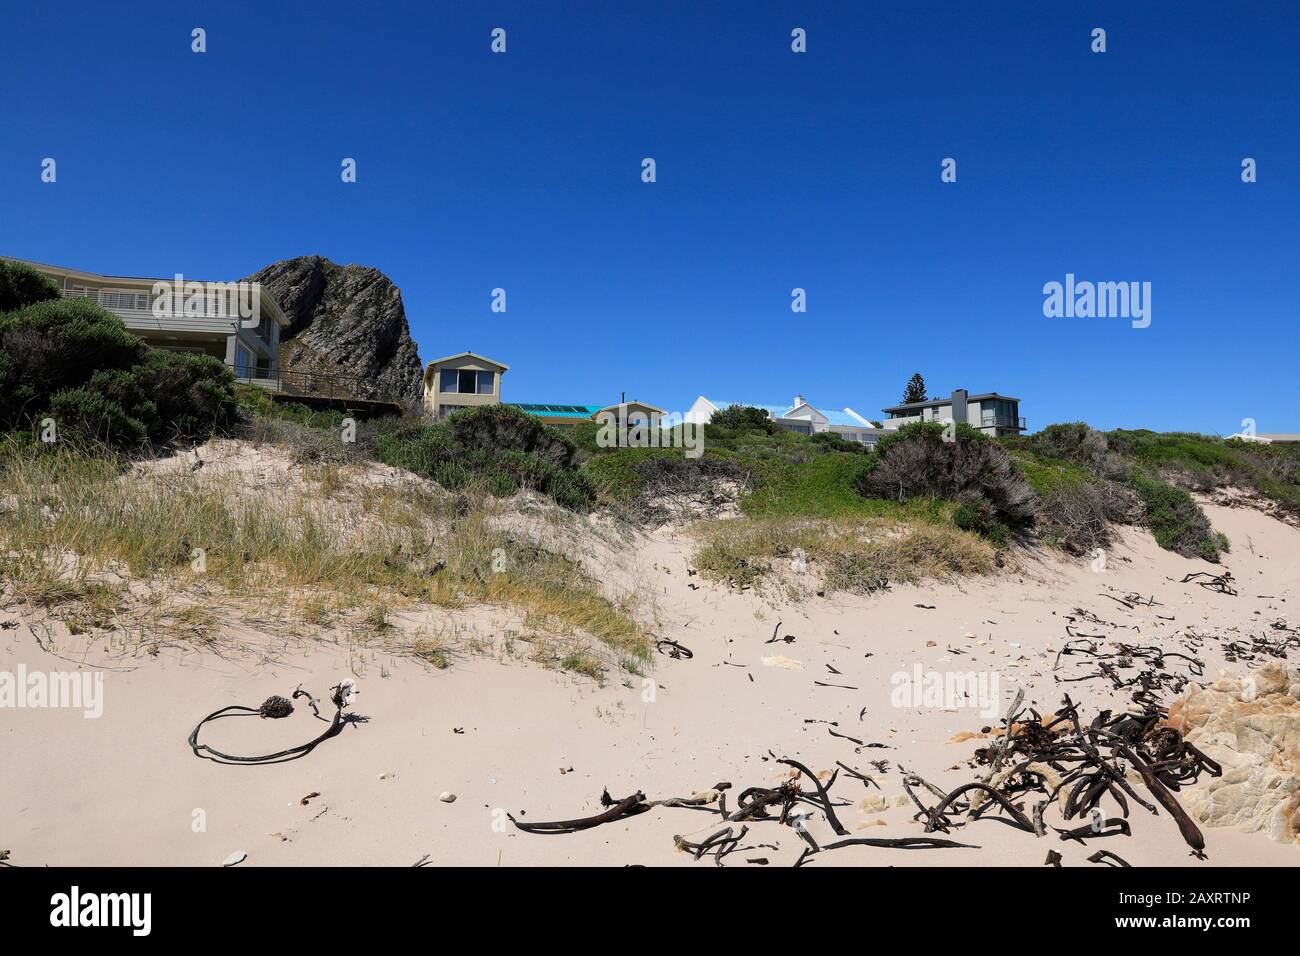 Rooi Els (Rooiels), Western Cape Province, South Africa Stock Photo